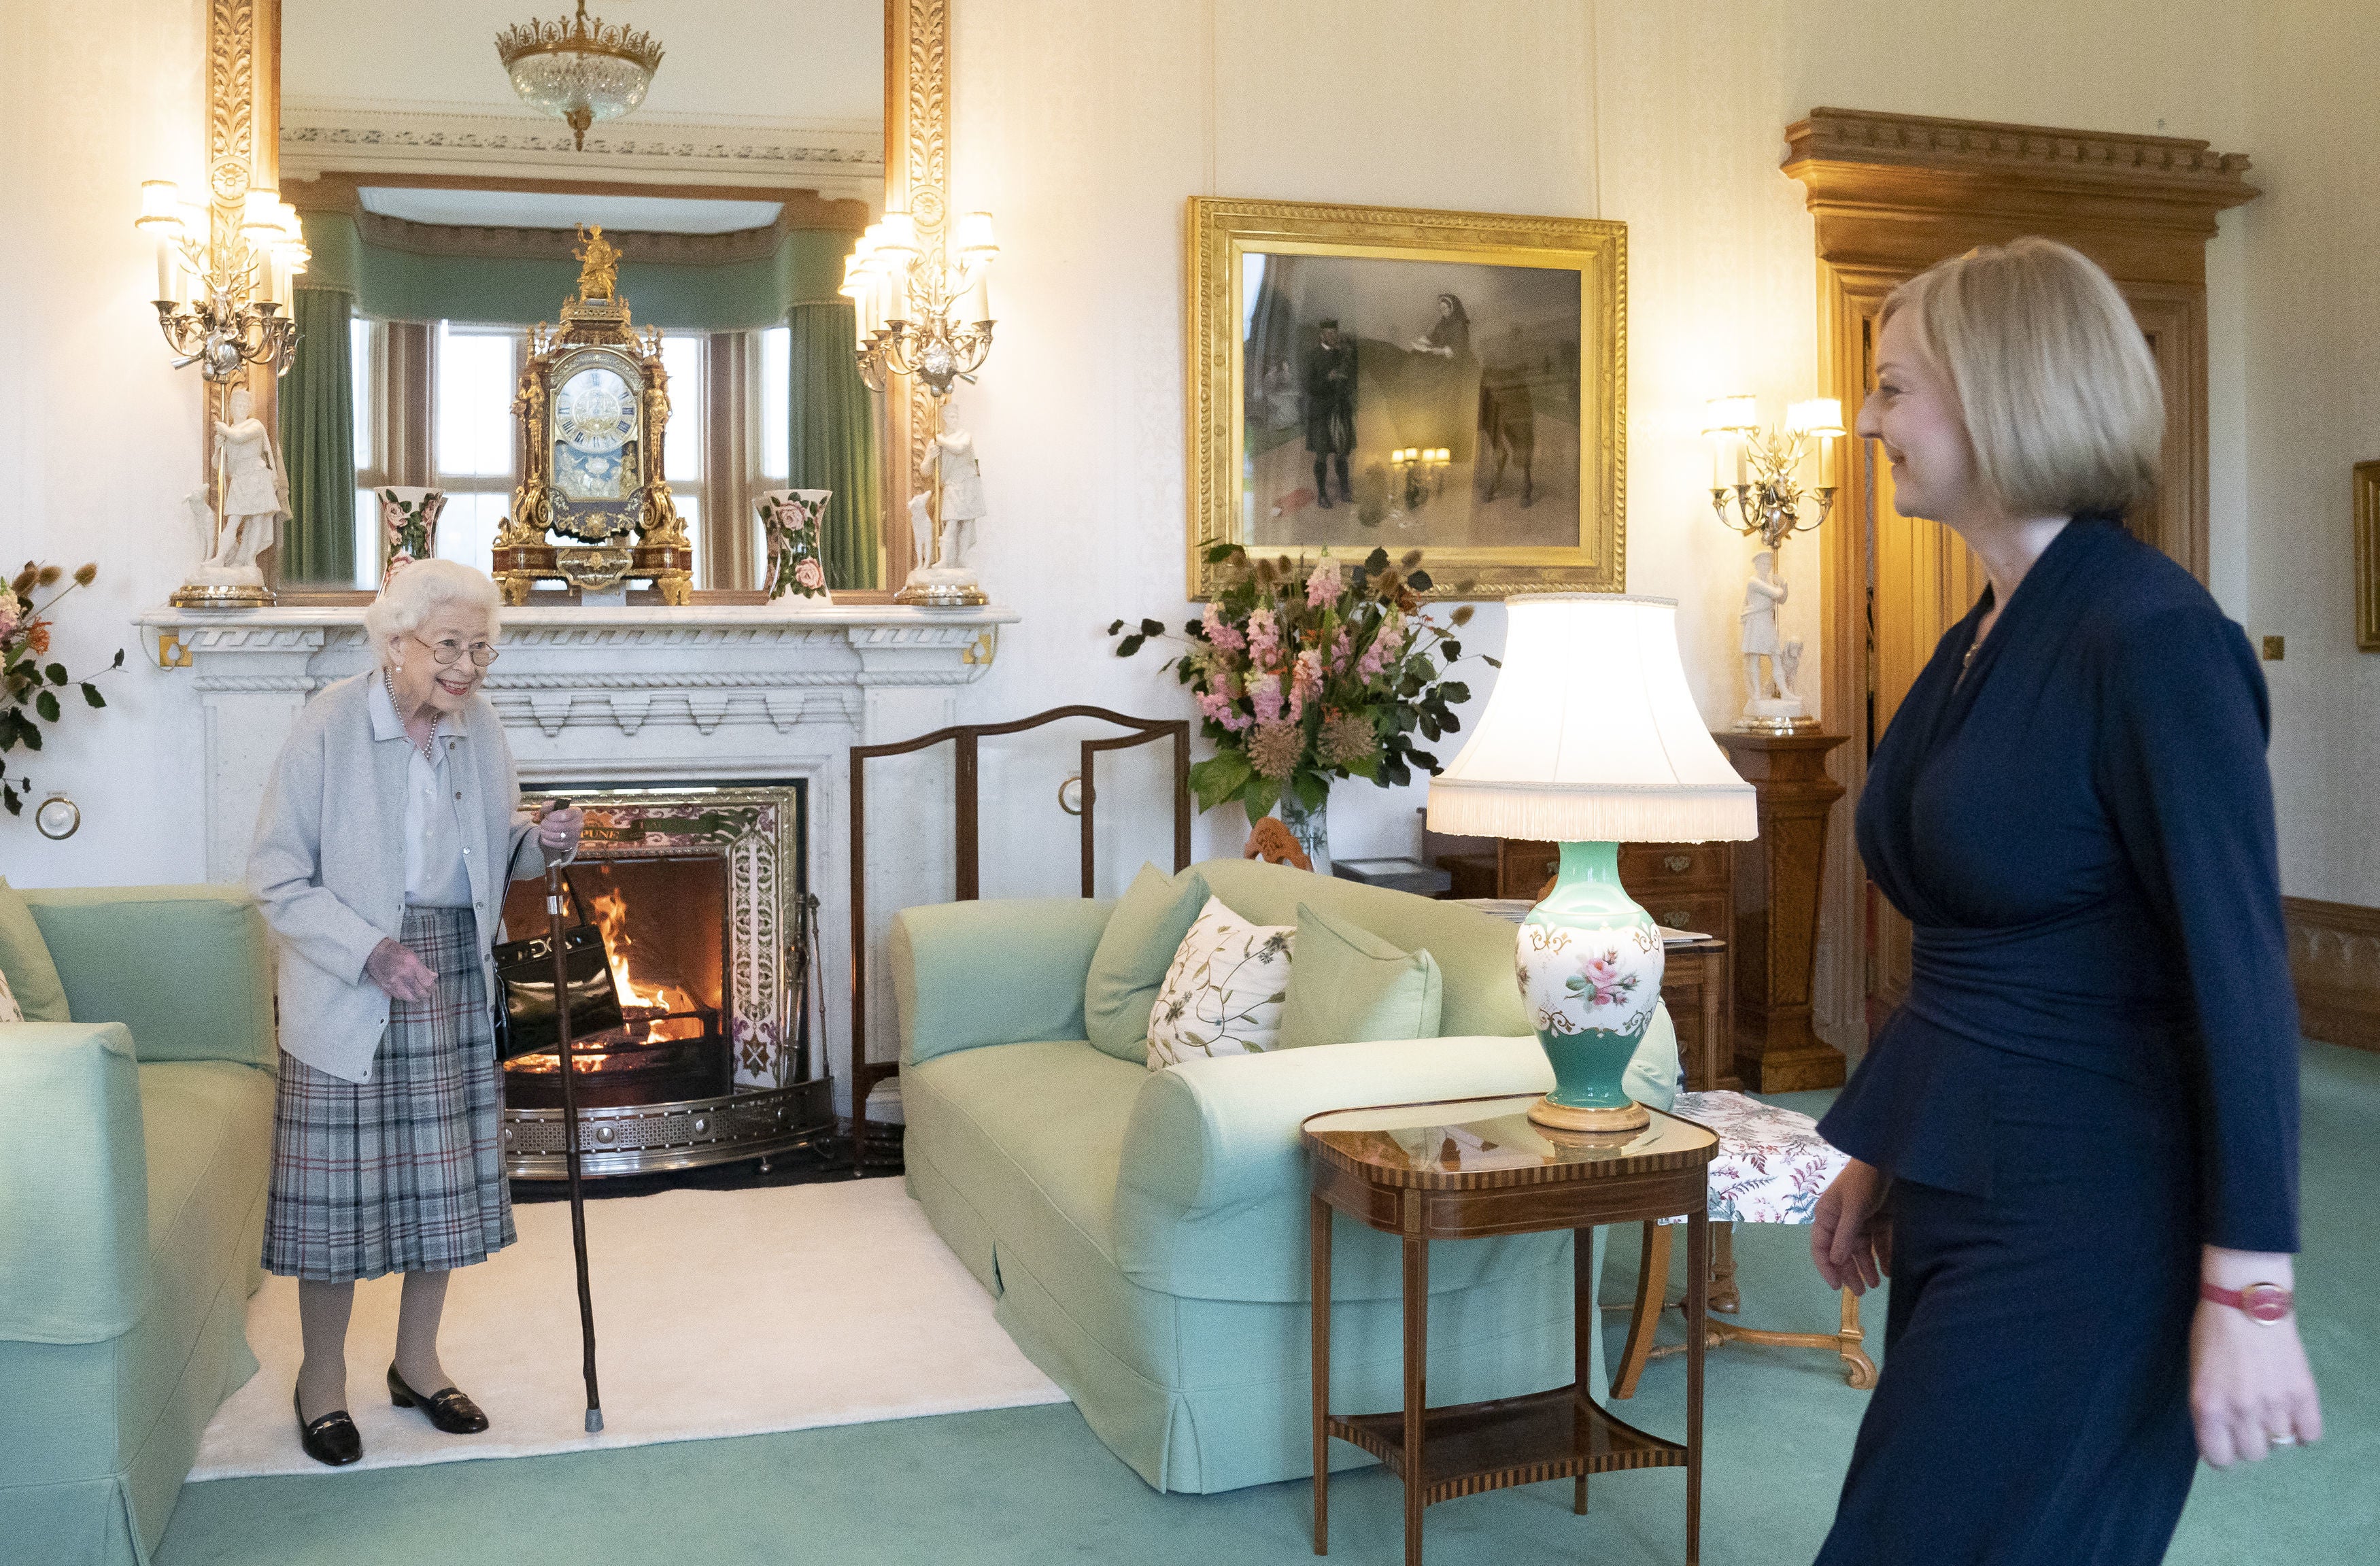 PA File Photo of Queen Elizabeth II welcomes Liz Truss during an audience at Balmoral, Scotland, where she invited the newly elected leader of the Conservative party to become Prime Minister and form a new government. Picture date: Tuesday September 6, 2022. See PA Feature ROYAL Queen Retiring. Picture credit should read: Jane Barlow/PA Photos. WARNING: This picture must only be used to accompany PA Feature ROYAL Queen Retiring.